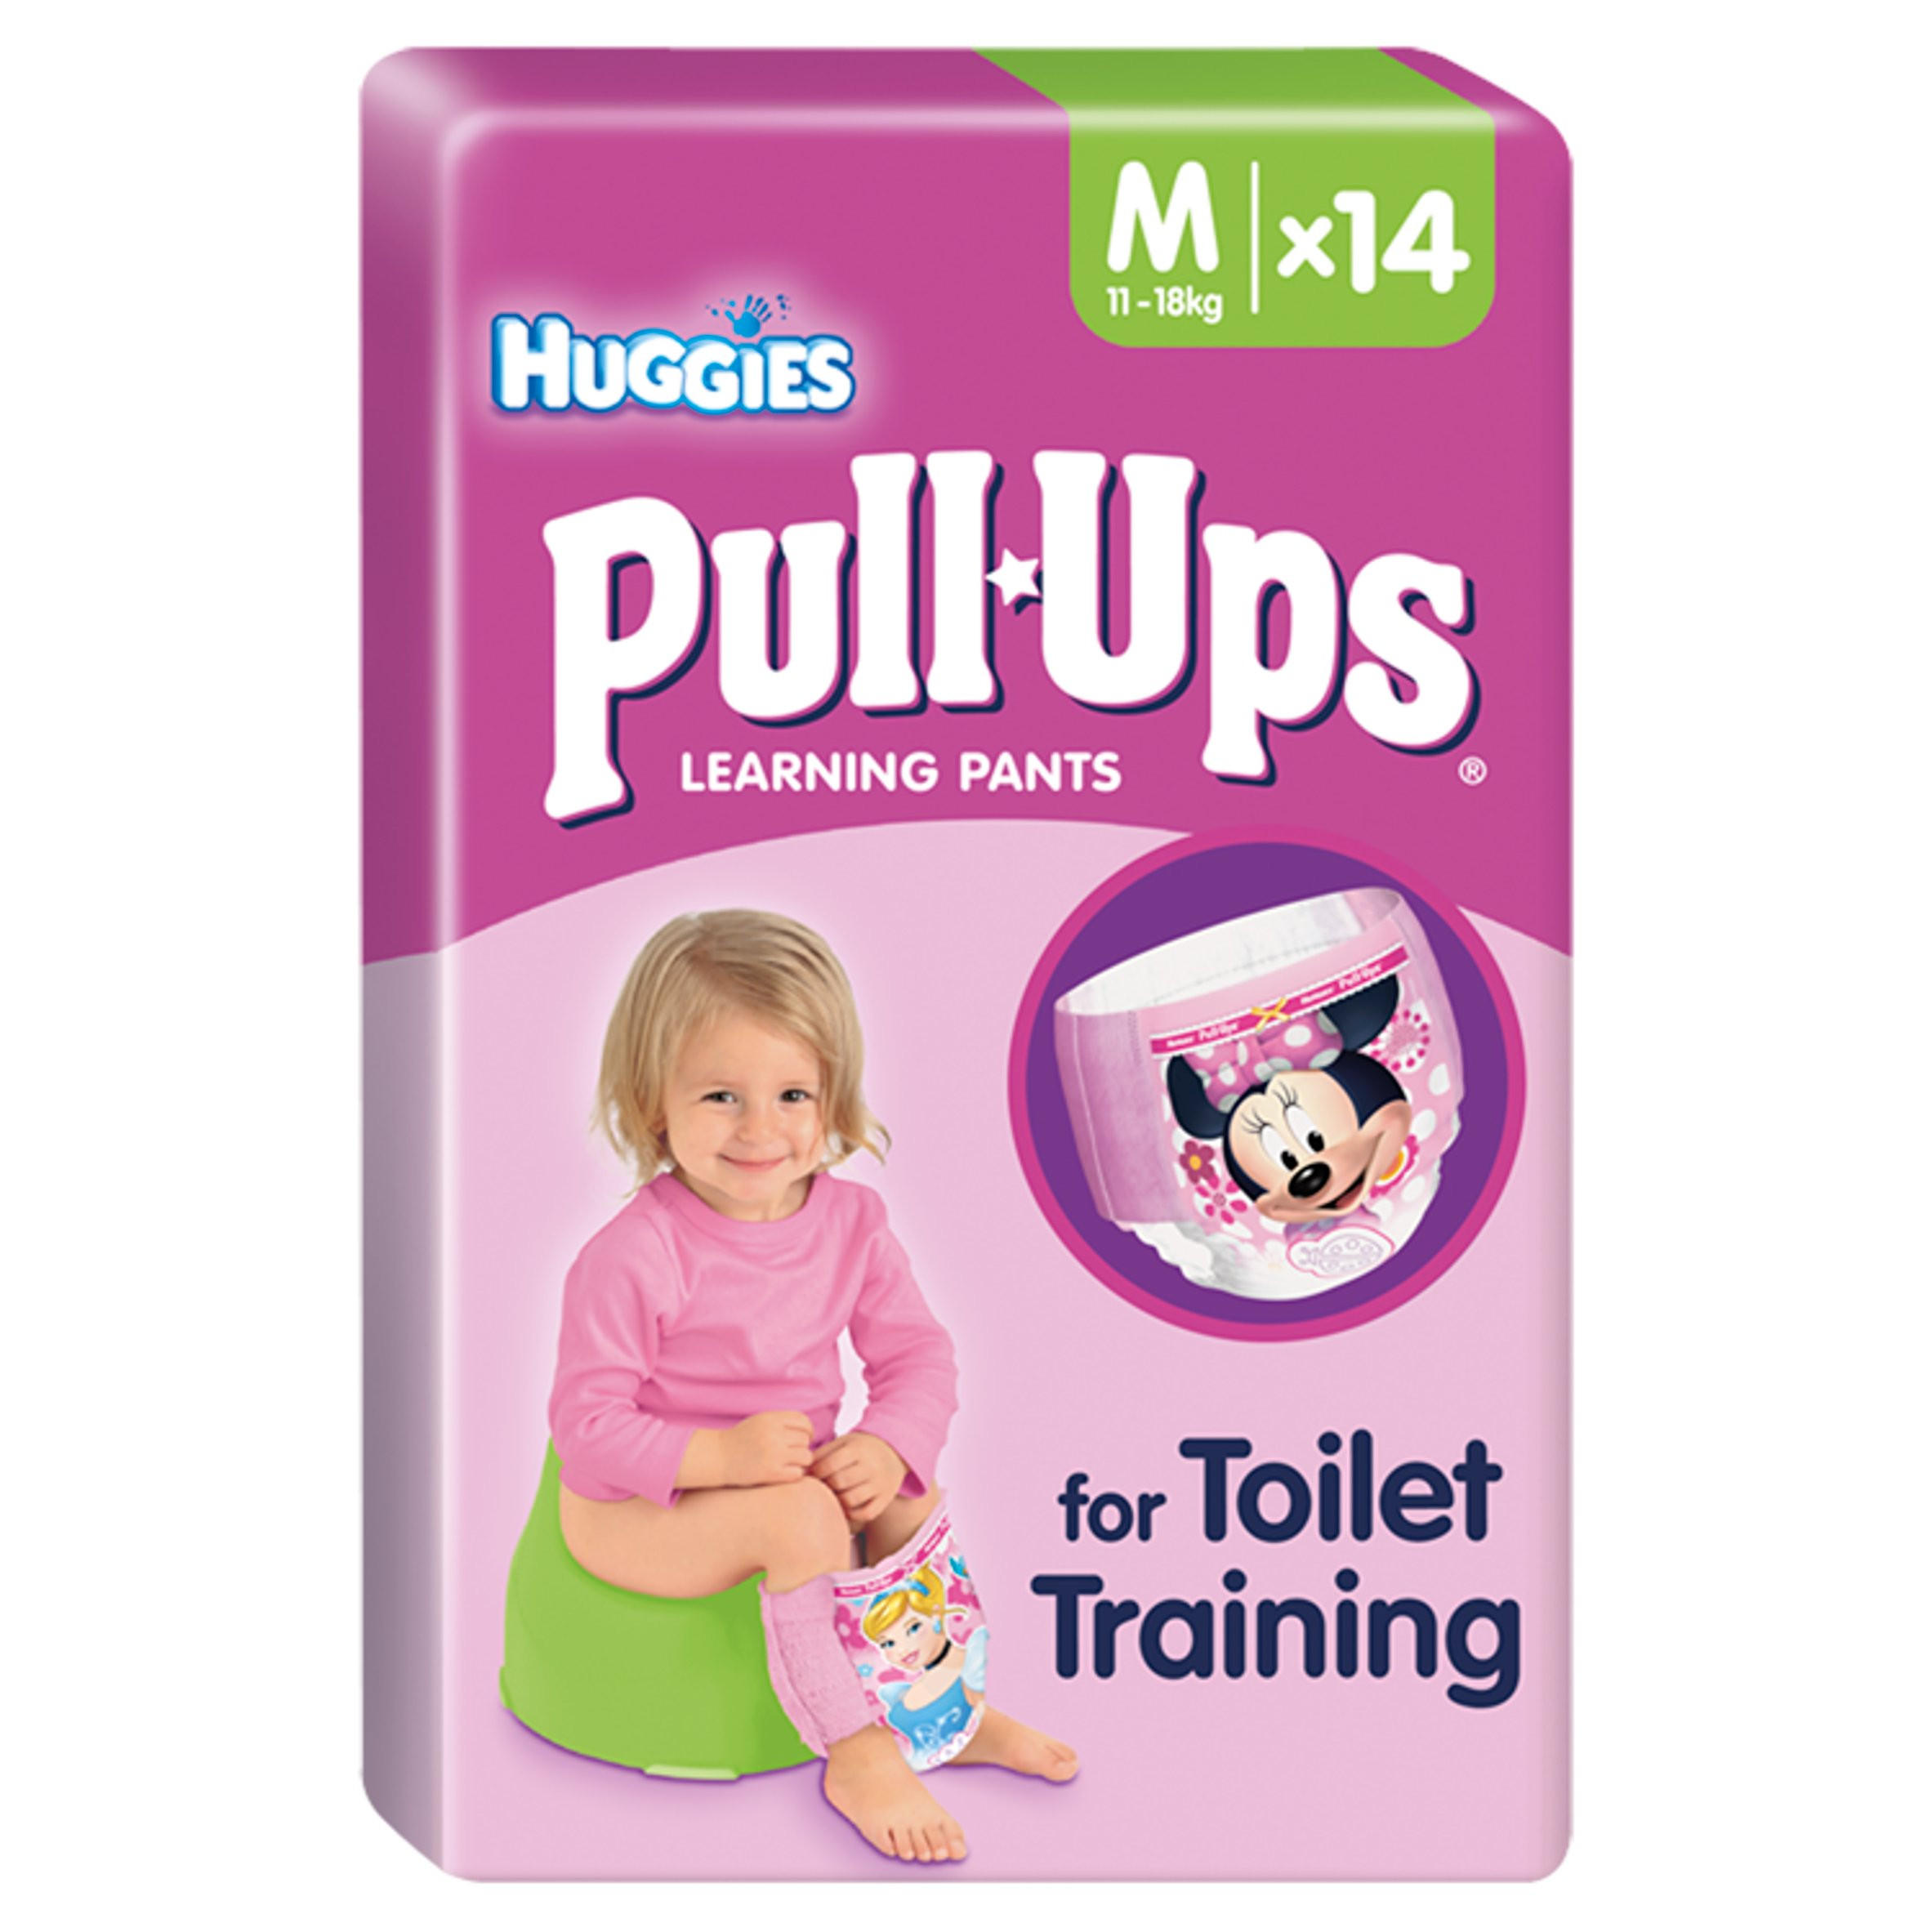 https://assets.iceland.co.uk/i/iceland/huggies_pull_ups_day_time_girls_size_m_11_18kg_24_40lbs_14_pants_57563_T1.jpg?$pdpzoom$